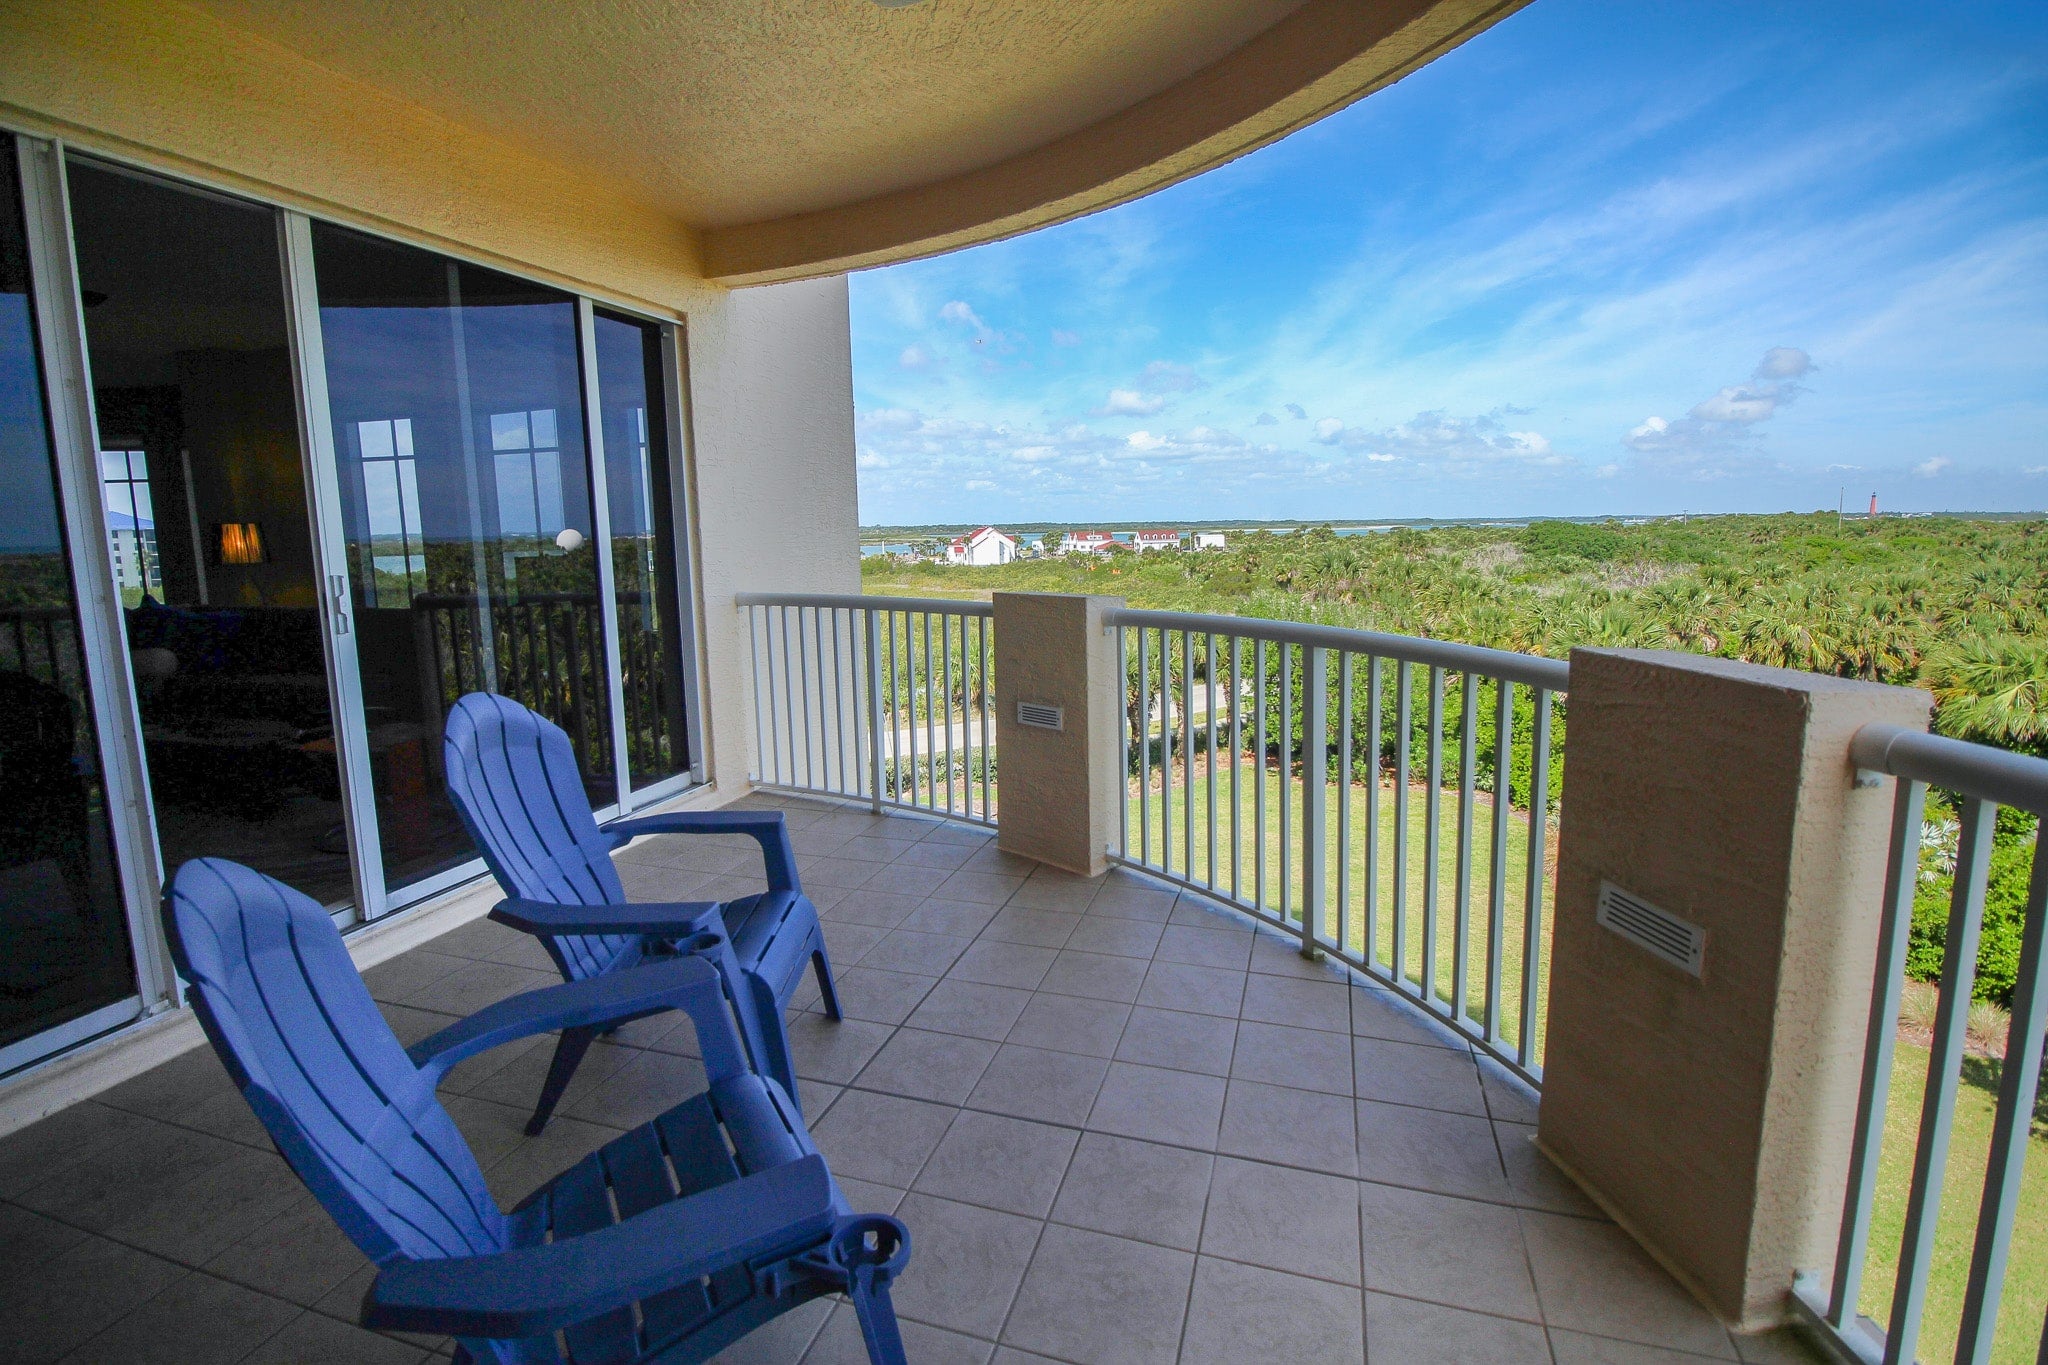 Take a seat and relax on this spacious balcony